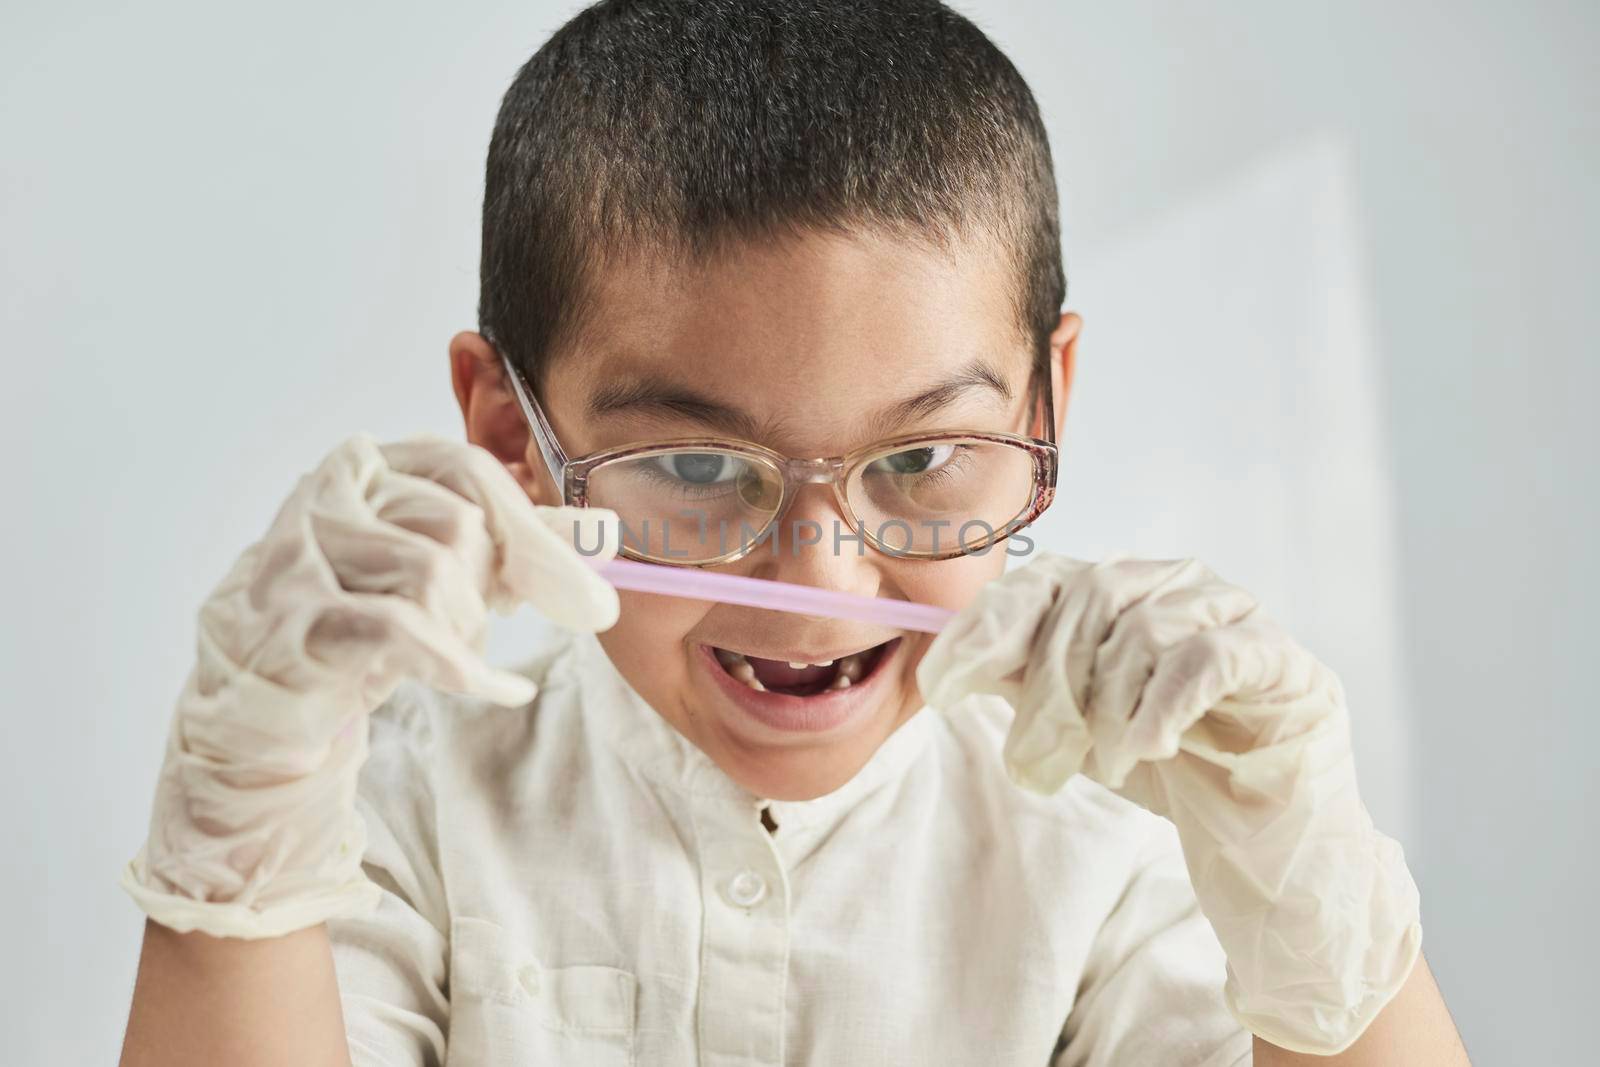 Portrait of 7 years old boy in glasses making funny facial expression against the white background